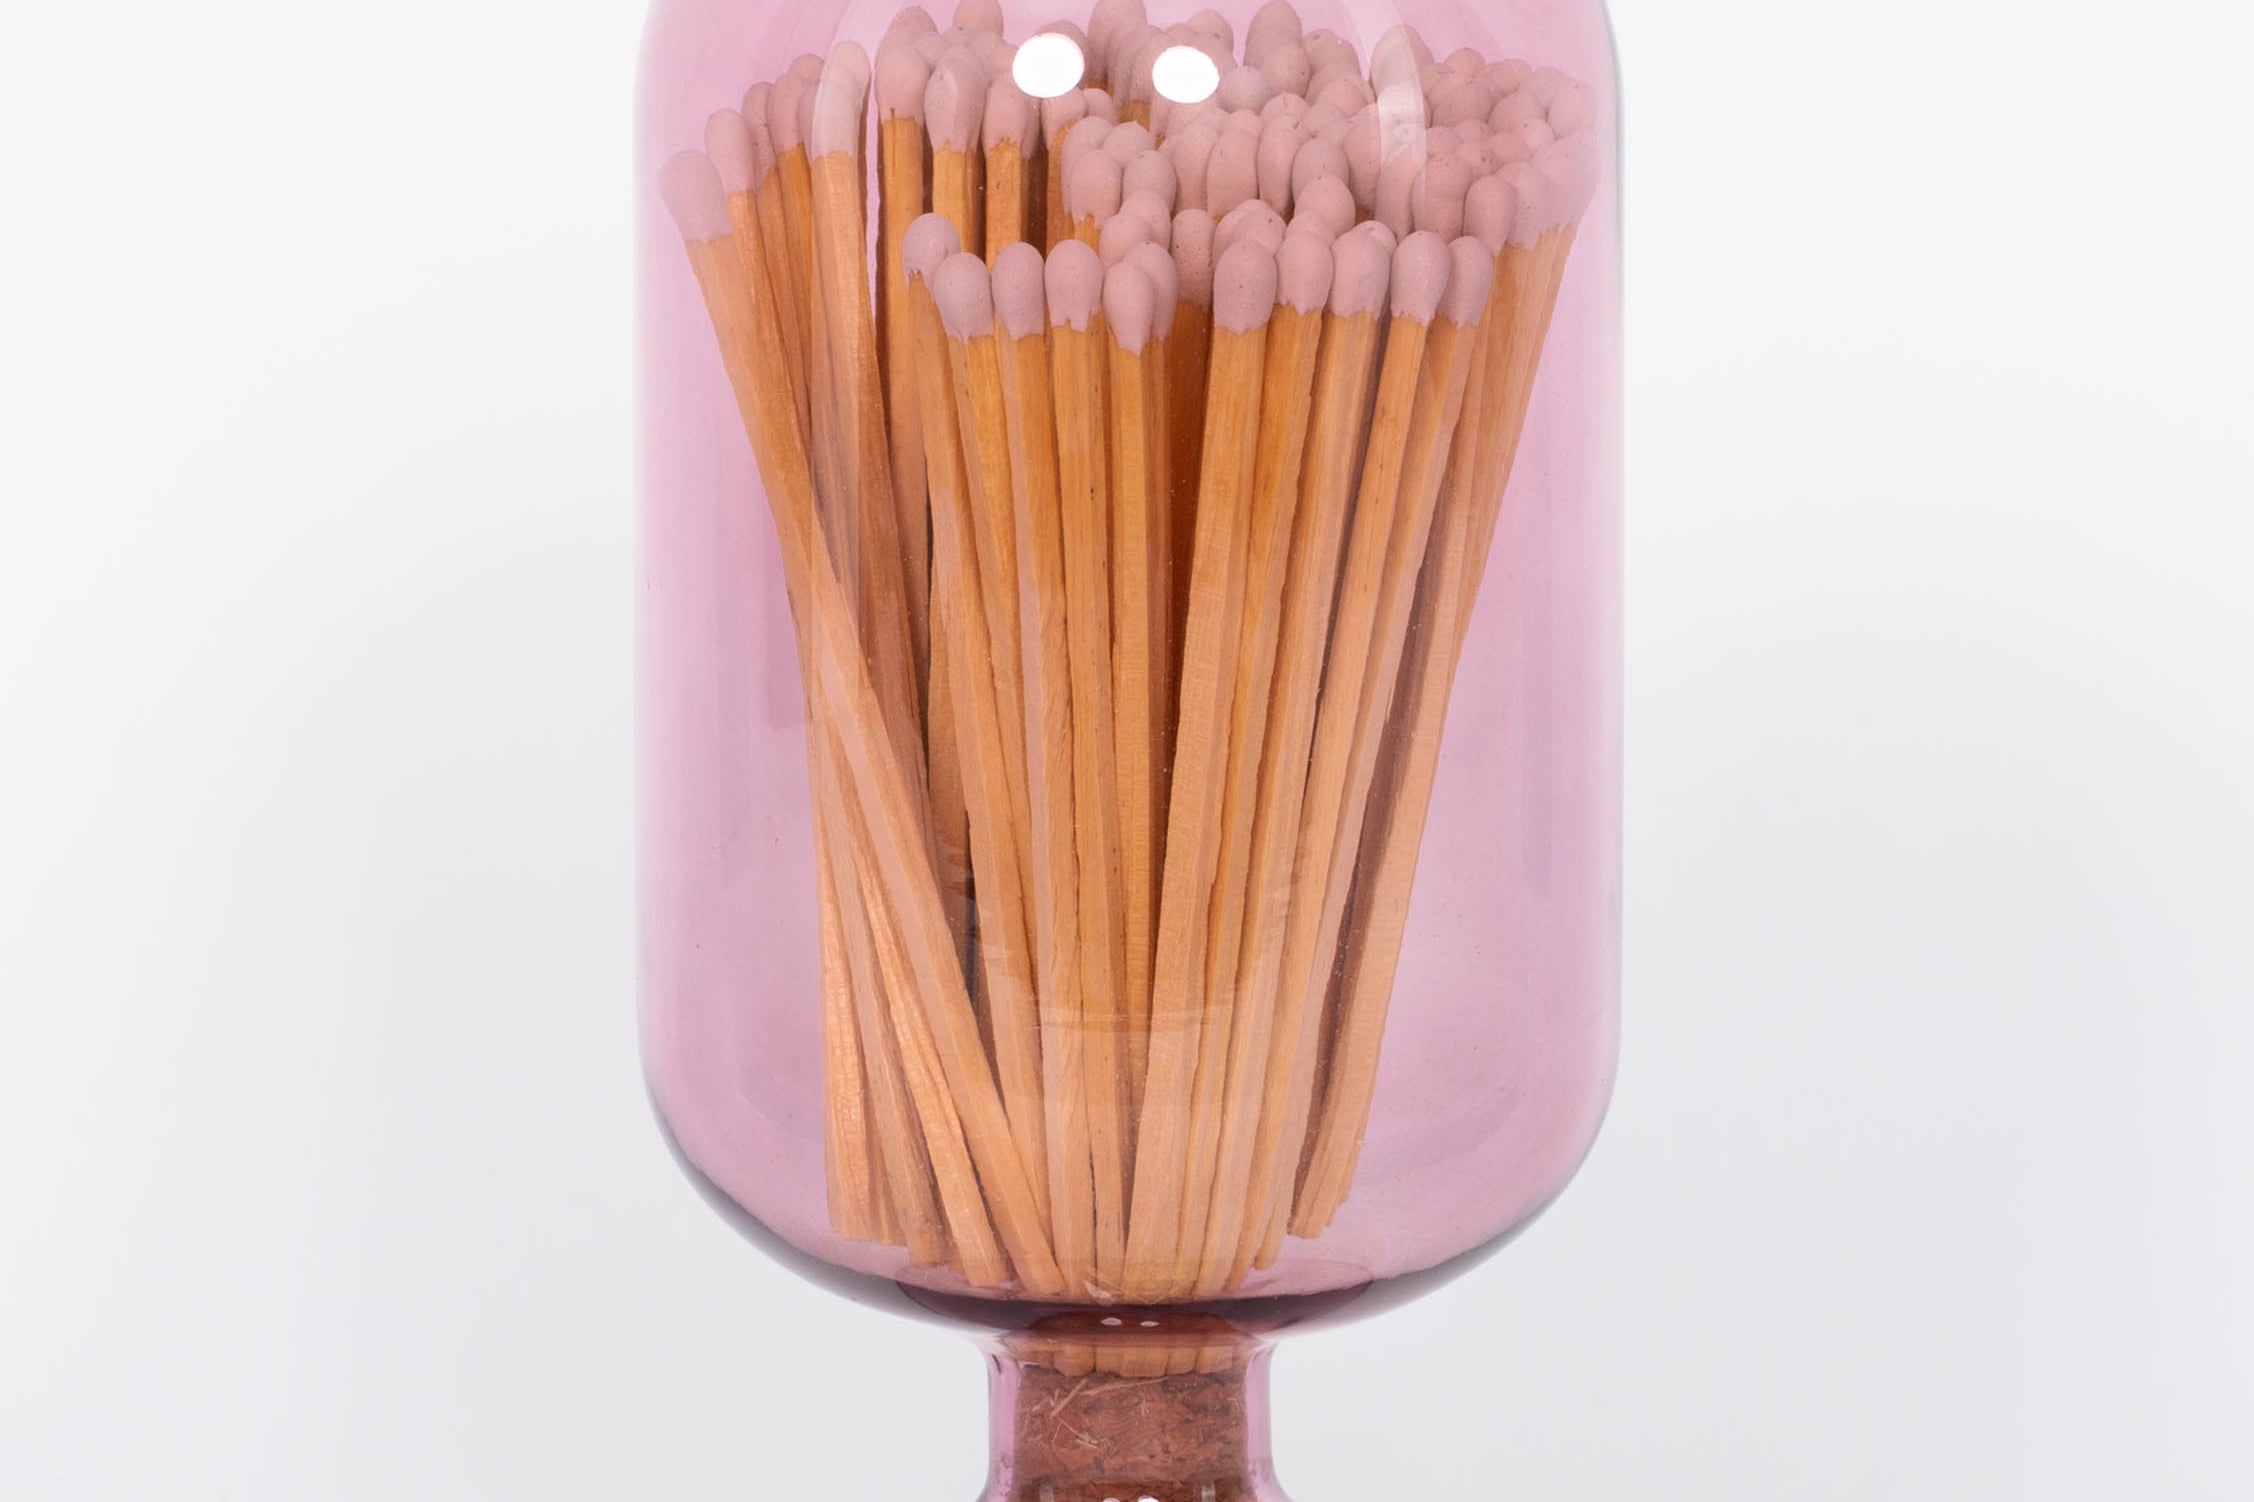 Mulberry colored Match Cloche by Skeem in jewel-toned vintage glass domes fitted with cork, holding 120 matches. White background.